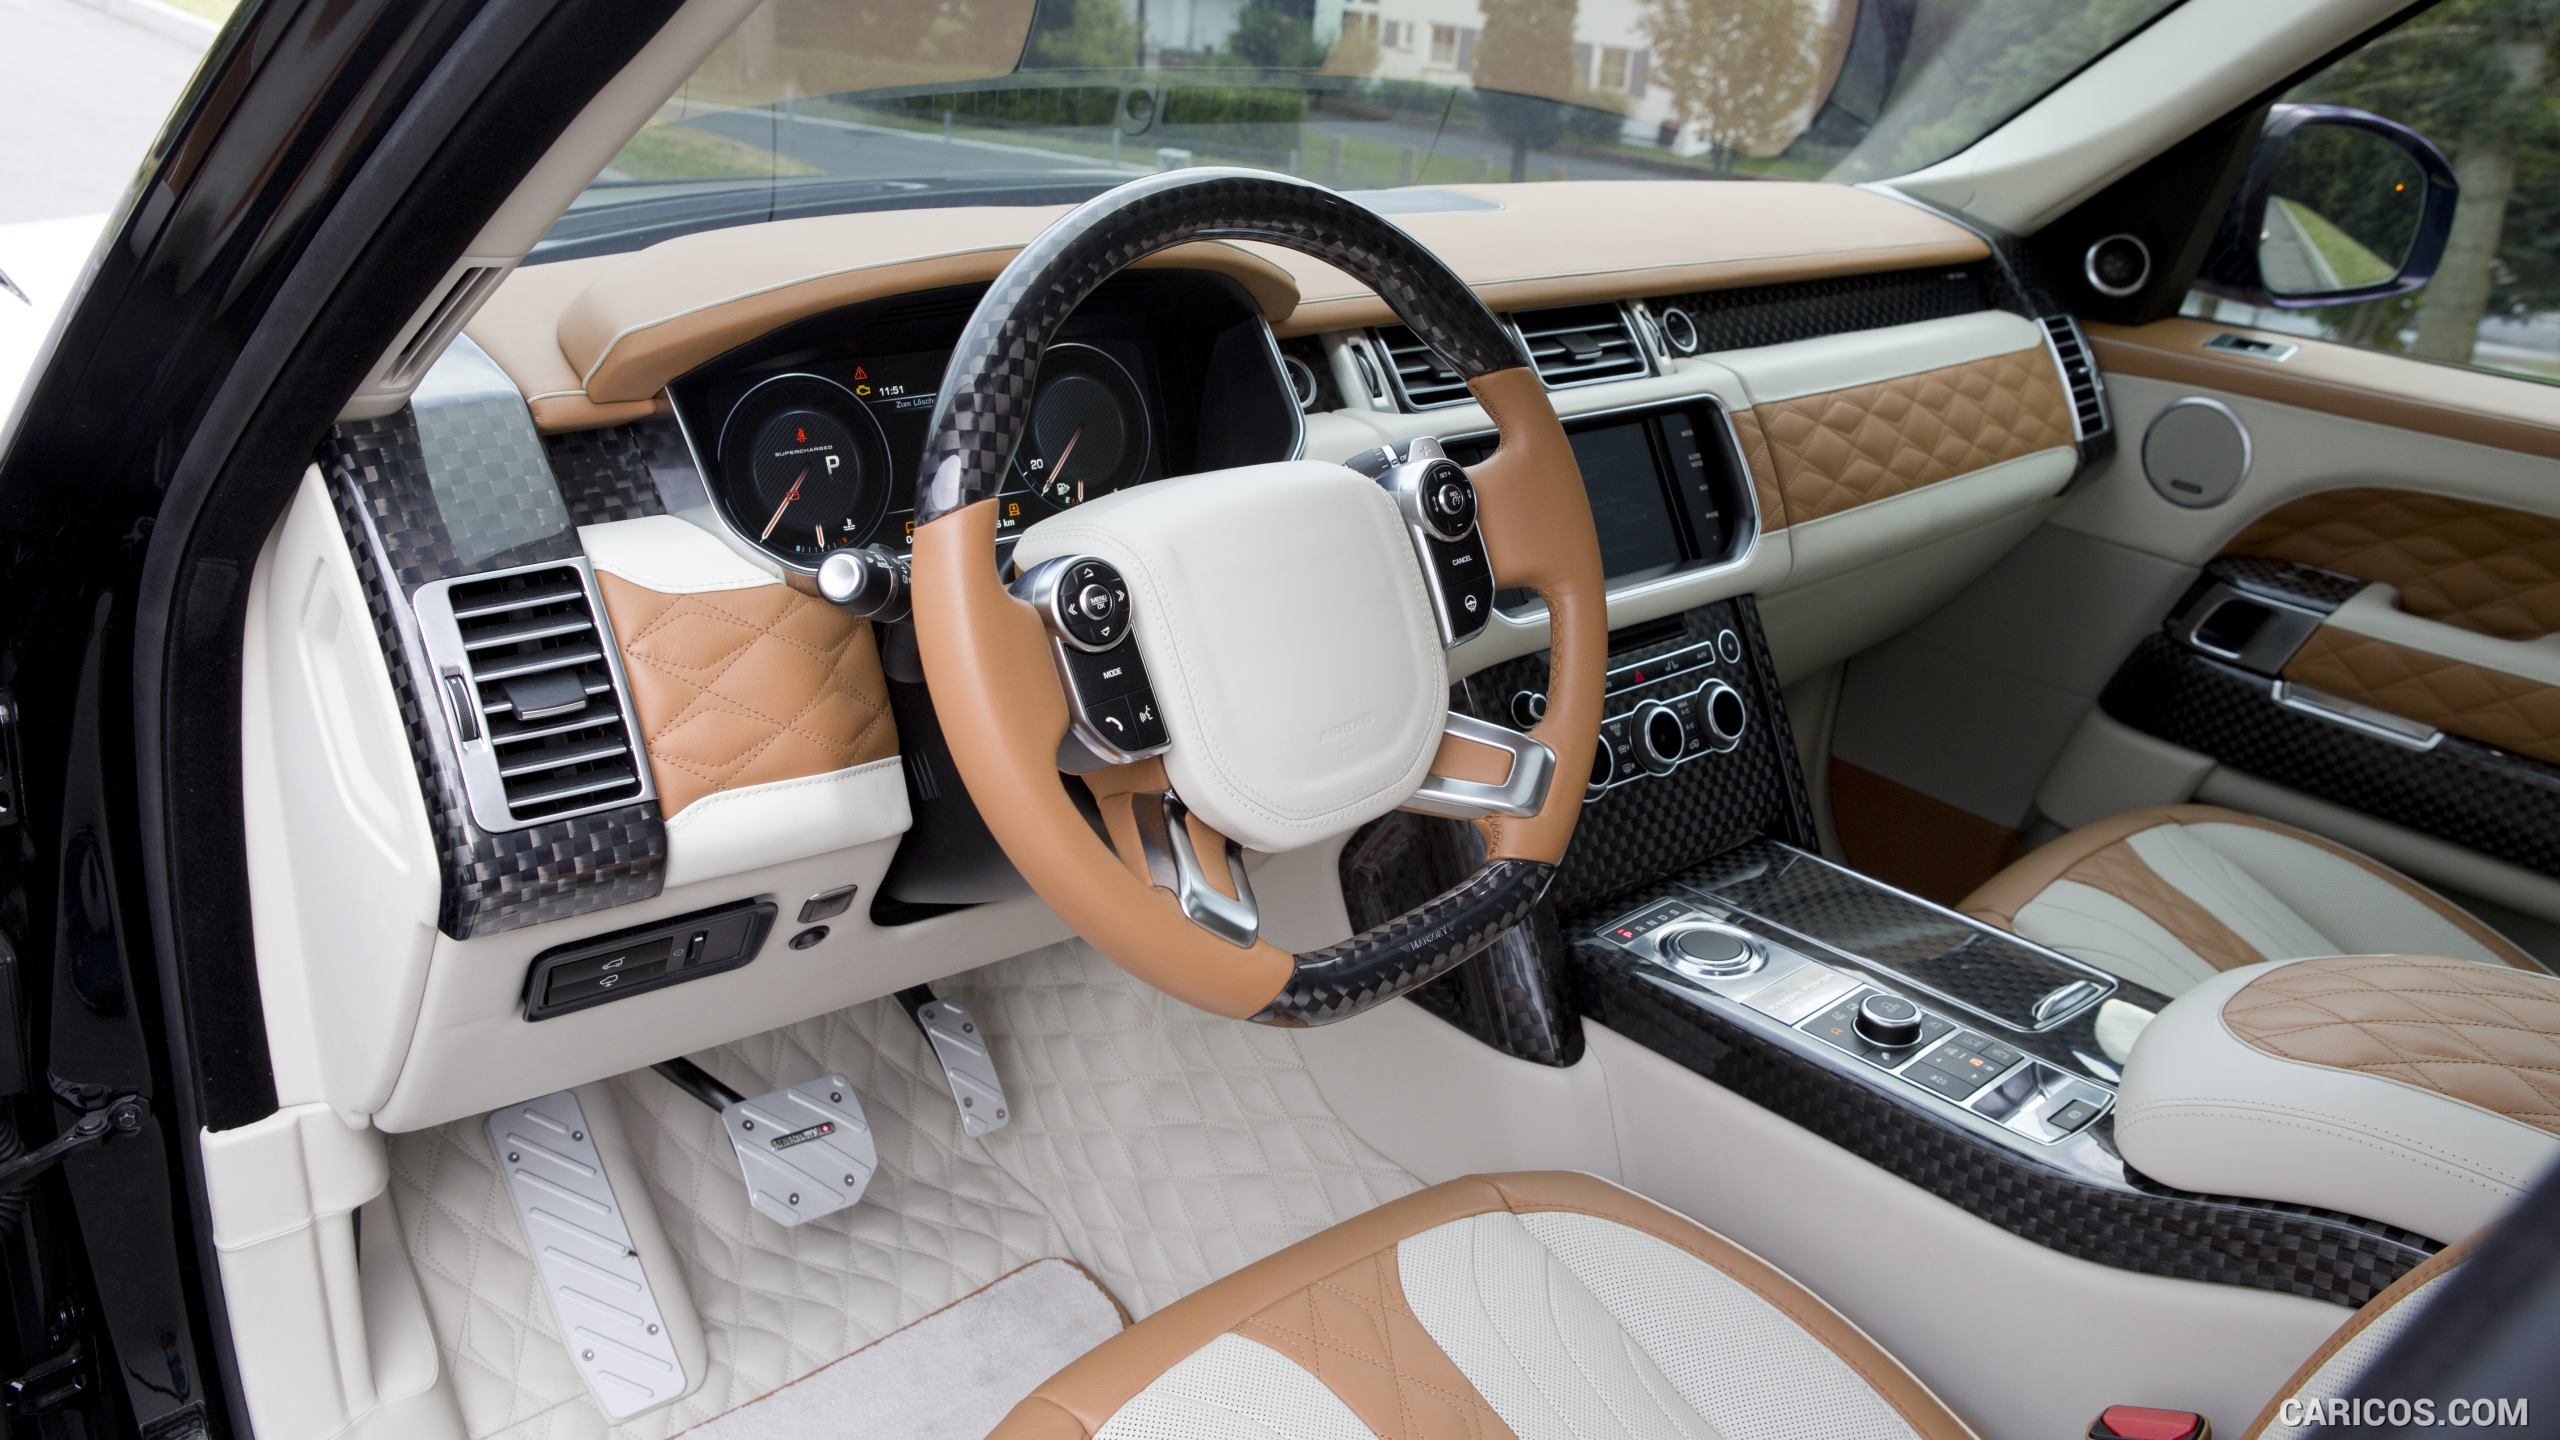 2016 MANSORY Range Rover Autobiography Extended - Interior, #9 of 12